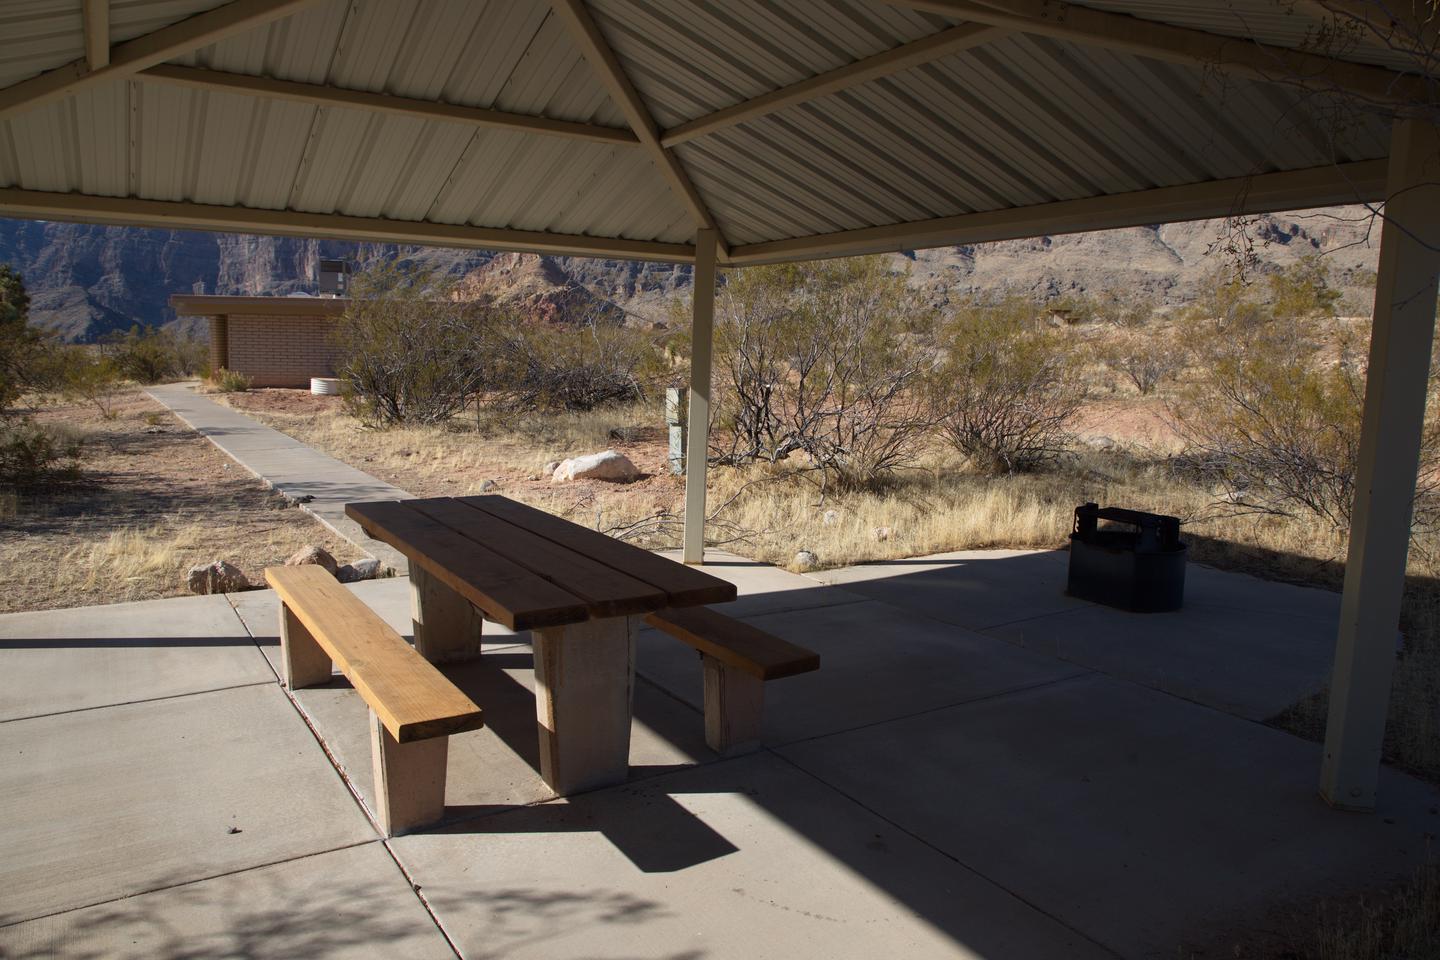 Site 70 highlighting the paved fire pit